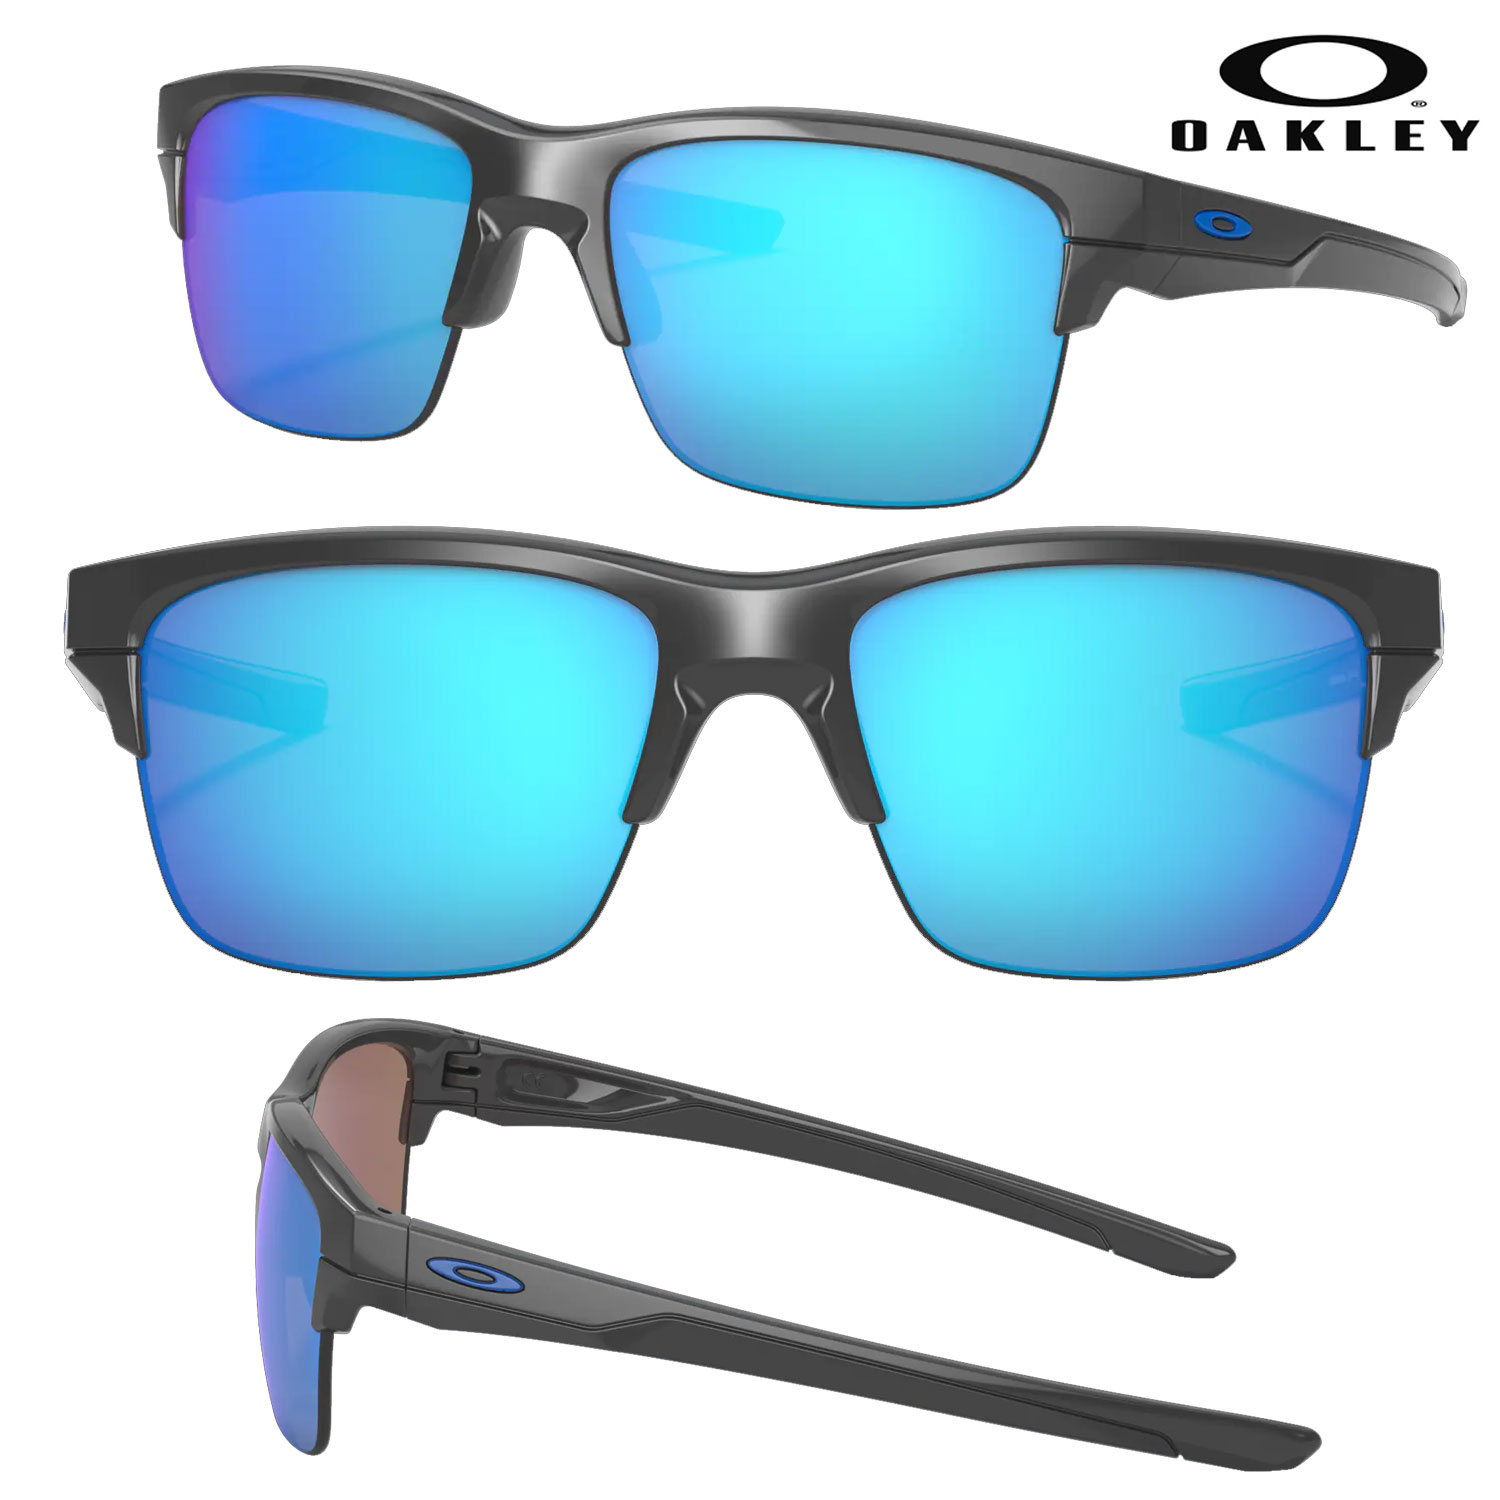 Oakley Thinlink Sunglasses | Cigar Page